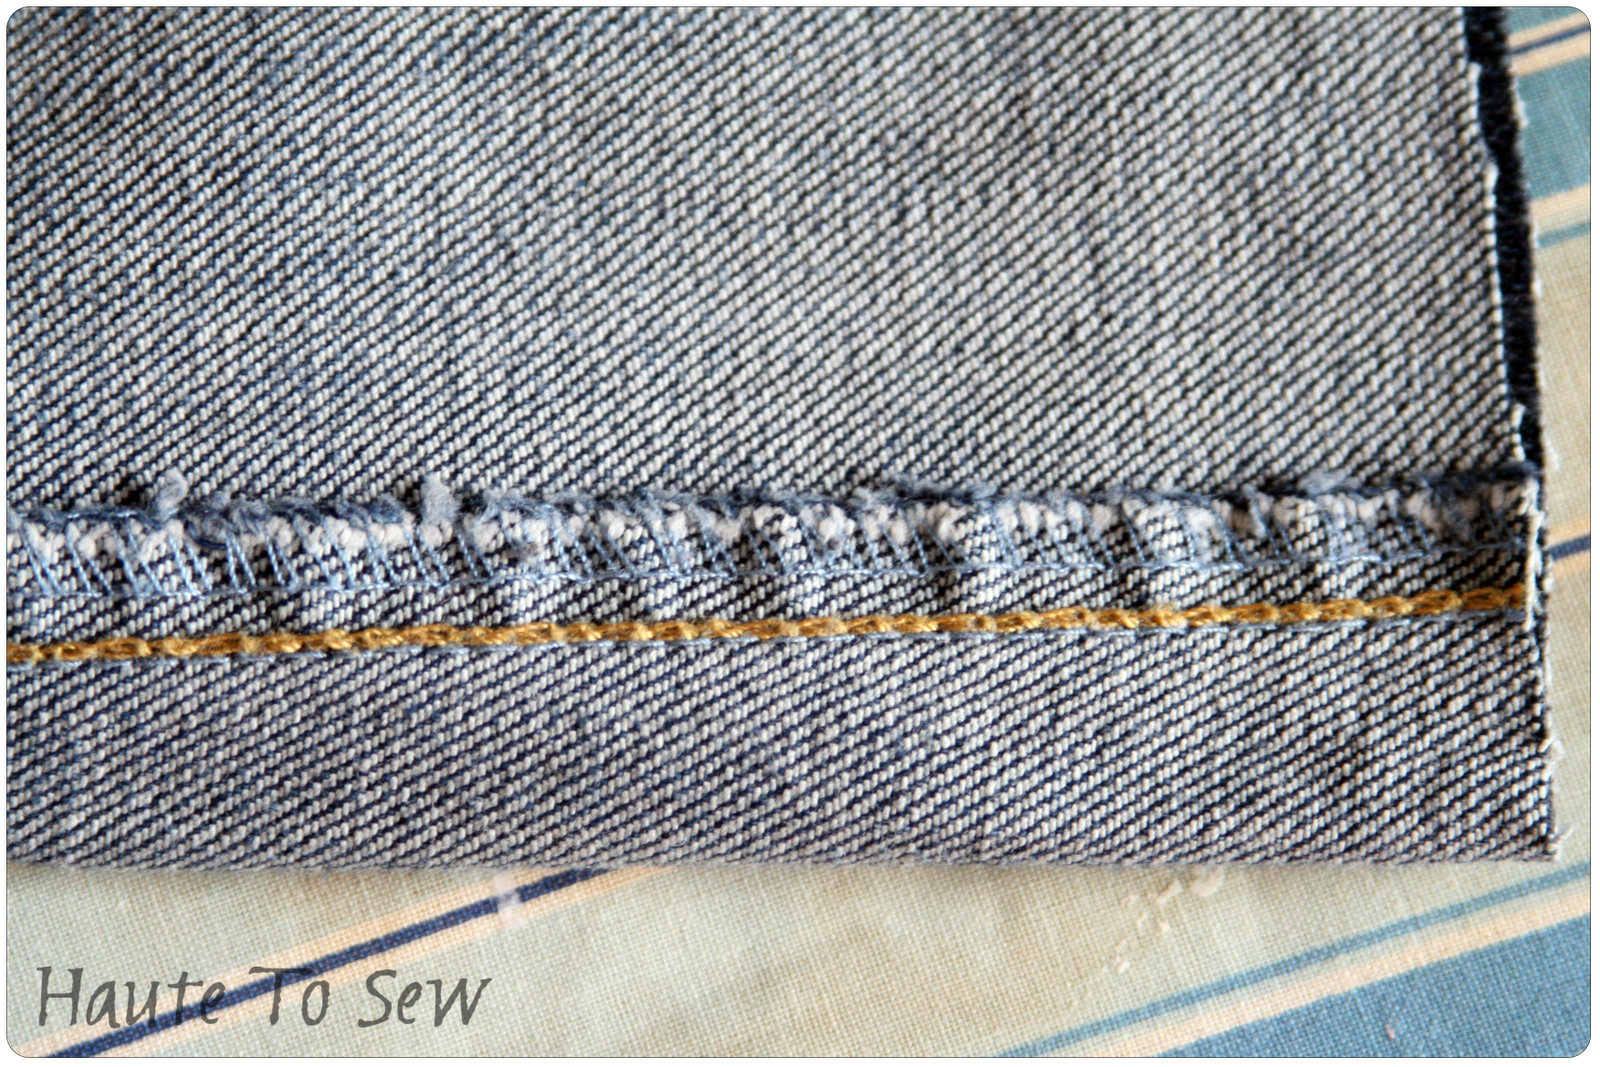 Haute To Sew: {Sewing Tip Tuesday} #11